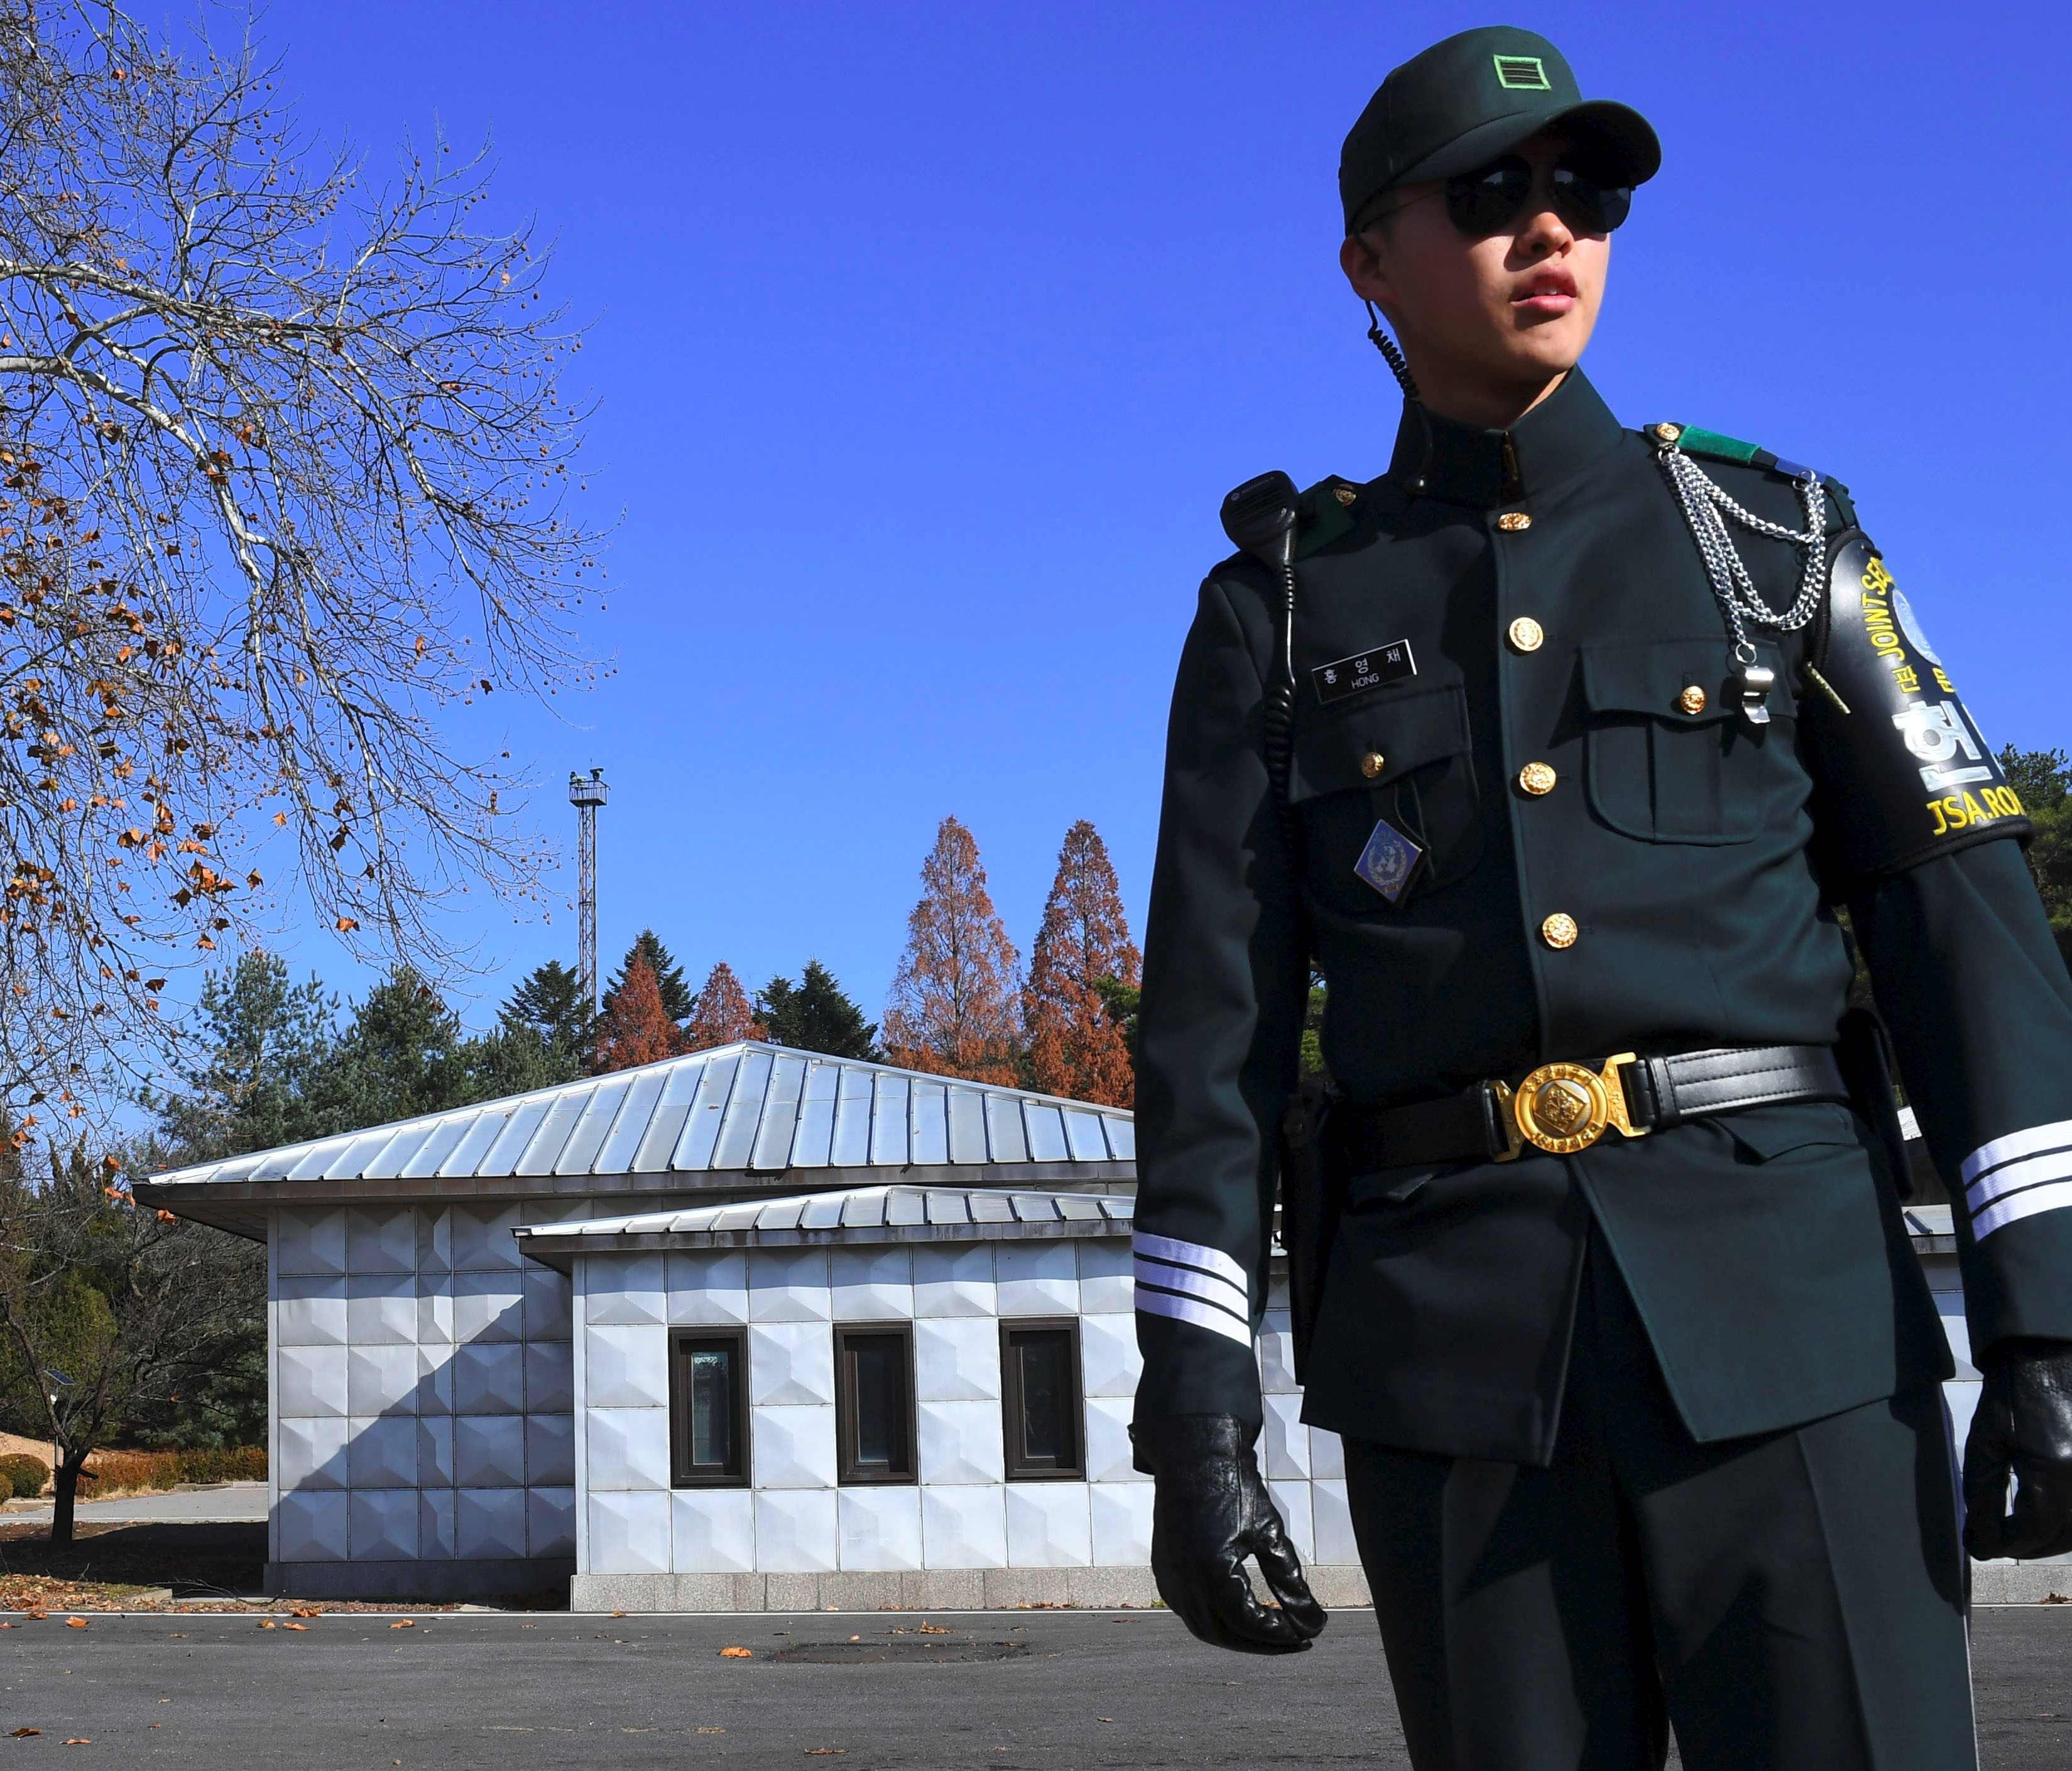 A South Korean soldier stands guard near the spot where a North Korean soldier recently crossed the border line two weeks ago, at the truce village of Panmunjom in the Demilitarized Zone on Nov. 27, 2017.